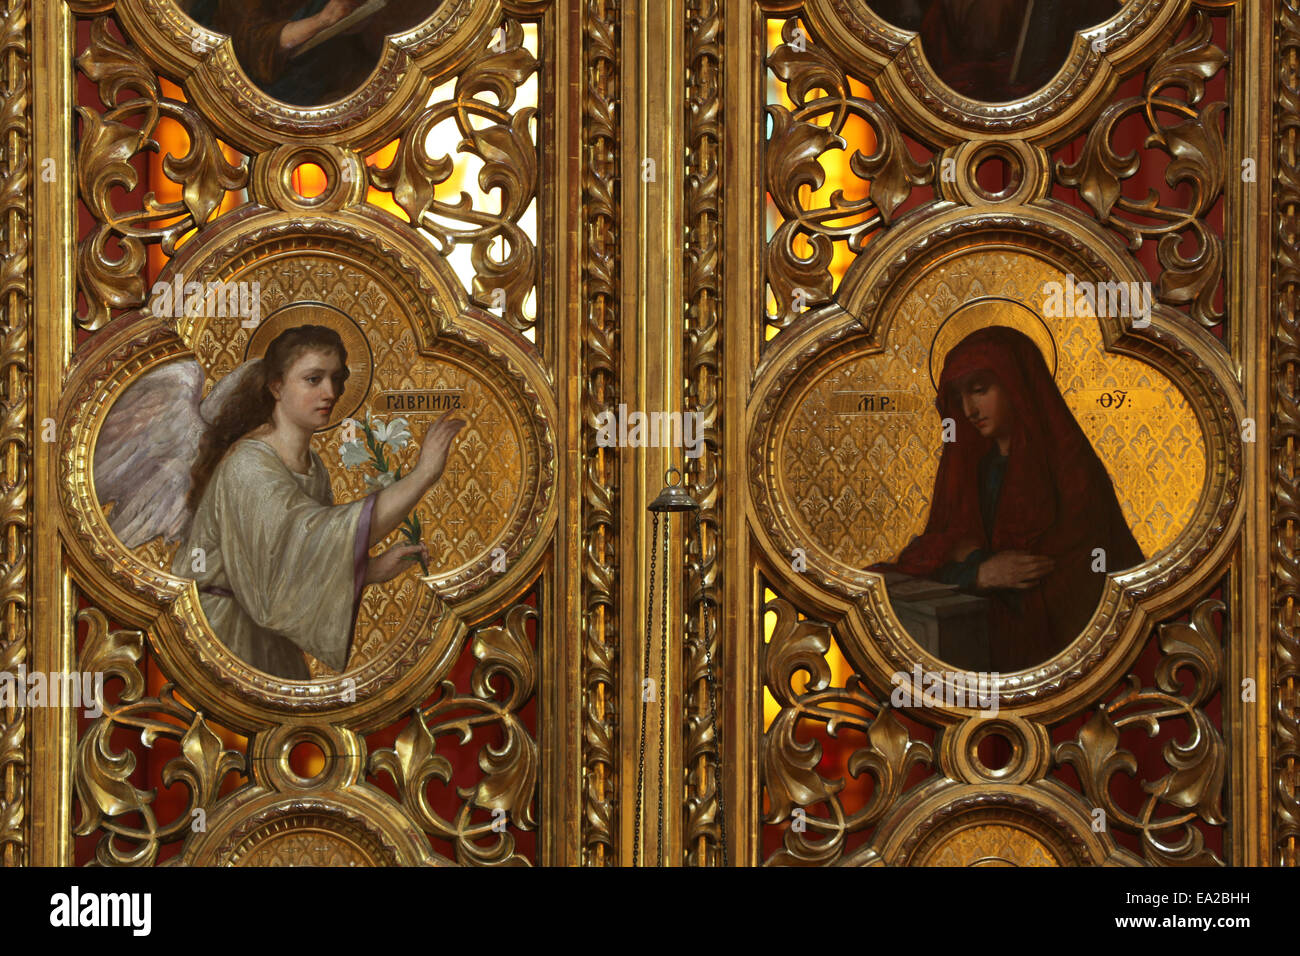 Annunciation. Icons in the Holy doors of the marble iconostasis in the Russian Orthodox Church in Dresden, Saxony, Germany. Stock Photo